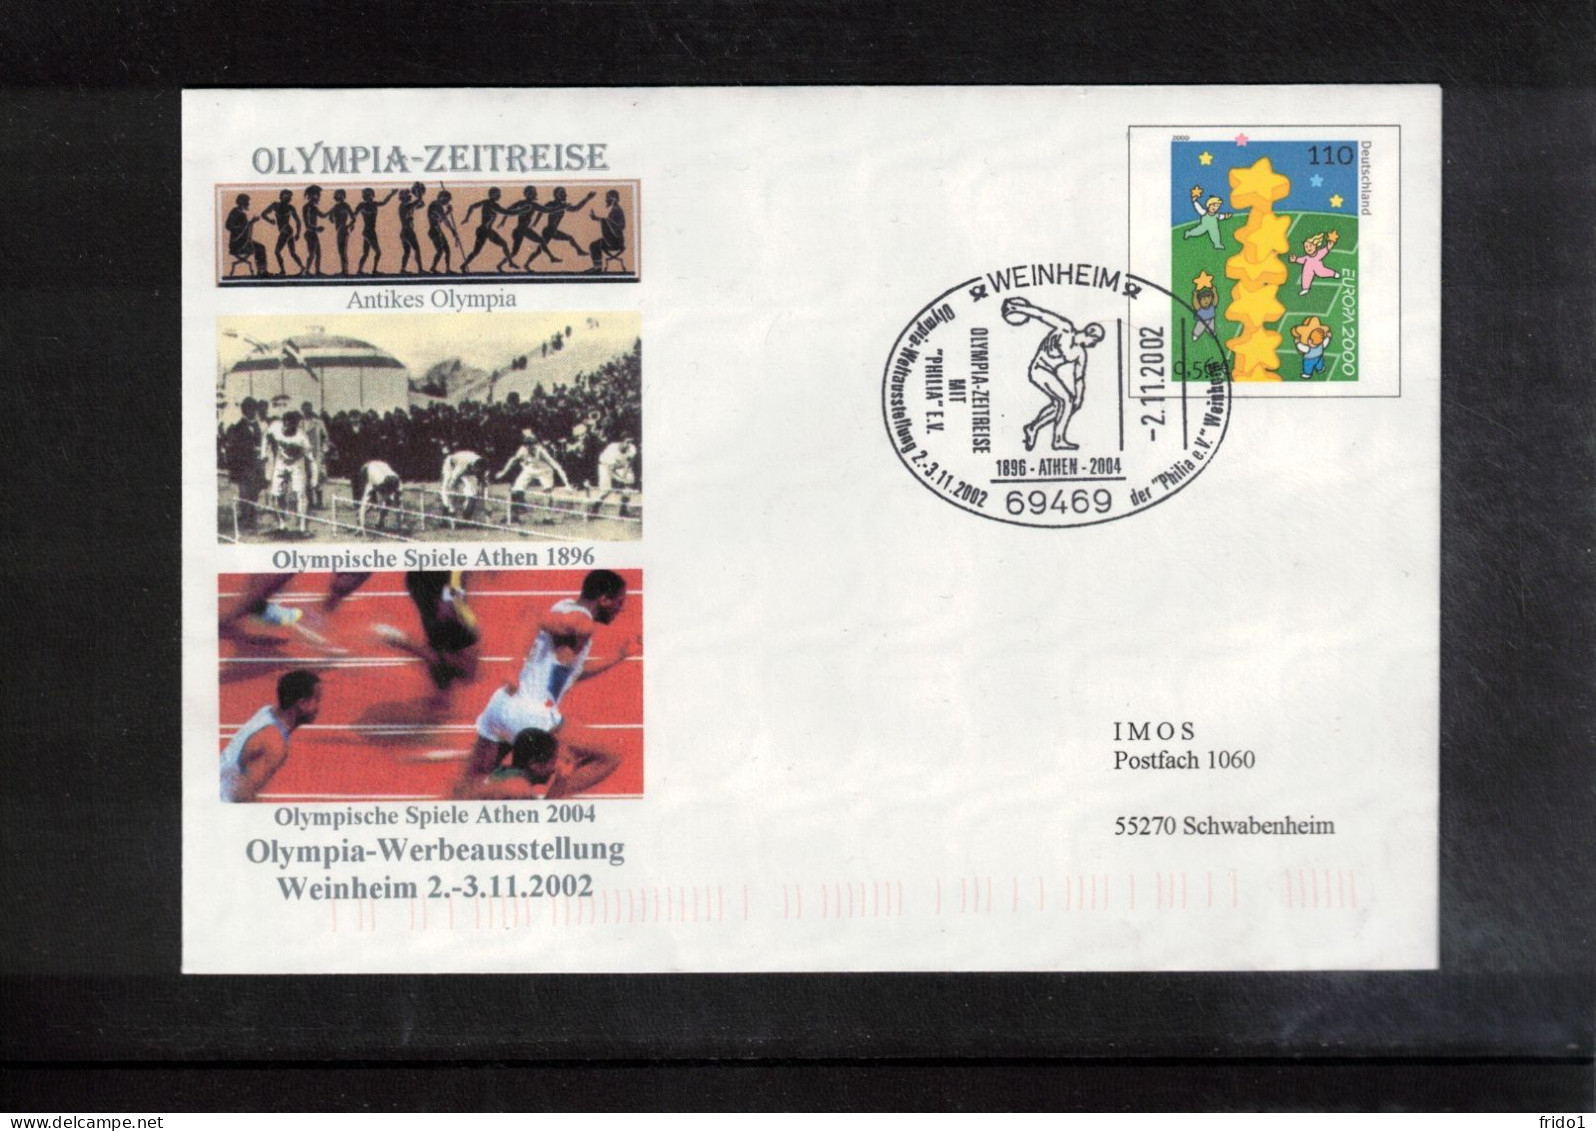 Germany / Deutschland 2002 Olympic Games Athens - Olympic Games Athens 1896 Interesting Cover - Summer 2004: Athens